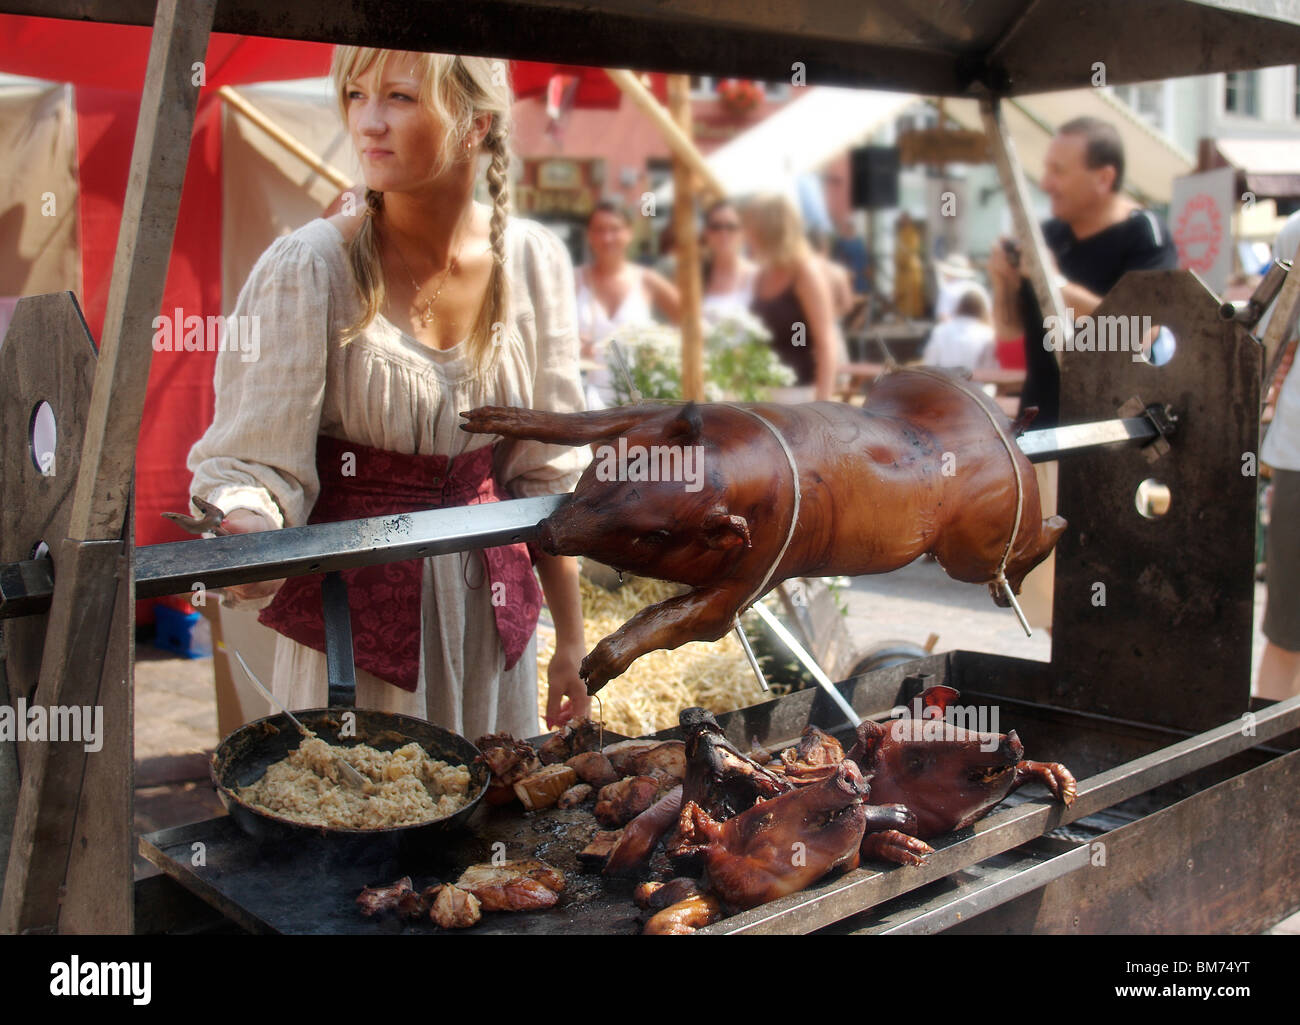 A girl cooks a pig during a medieval market in Tallinn, Estonia Stock Photo